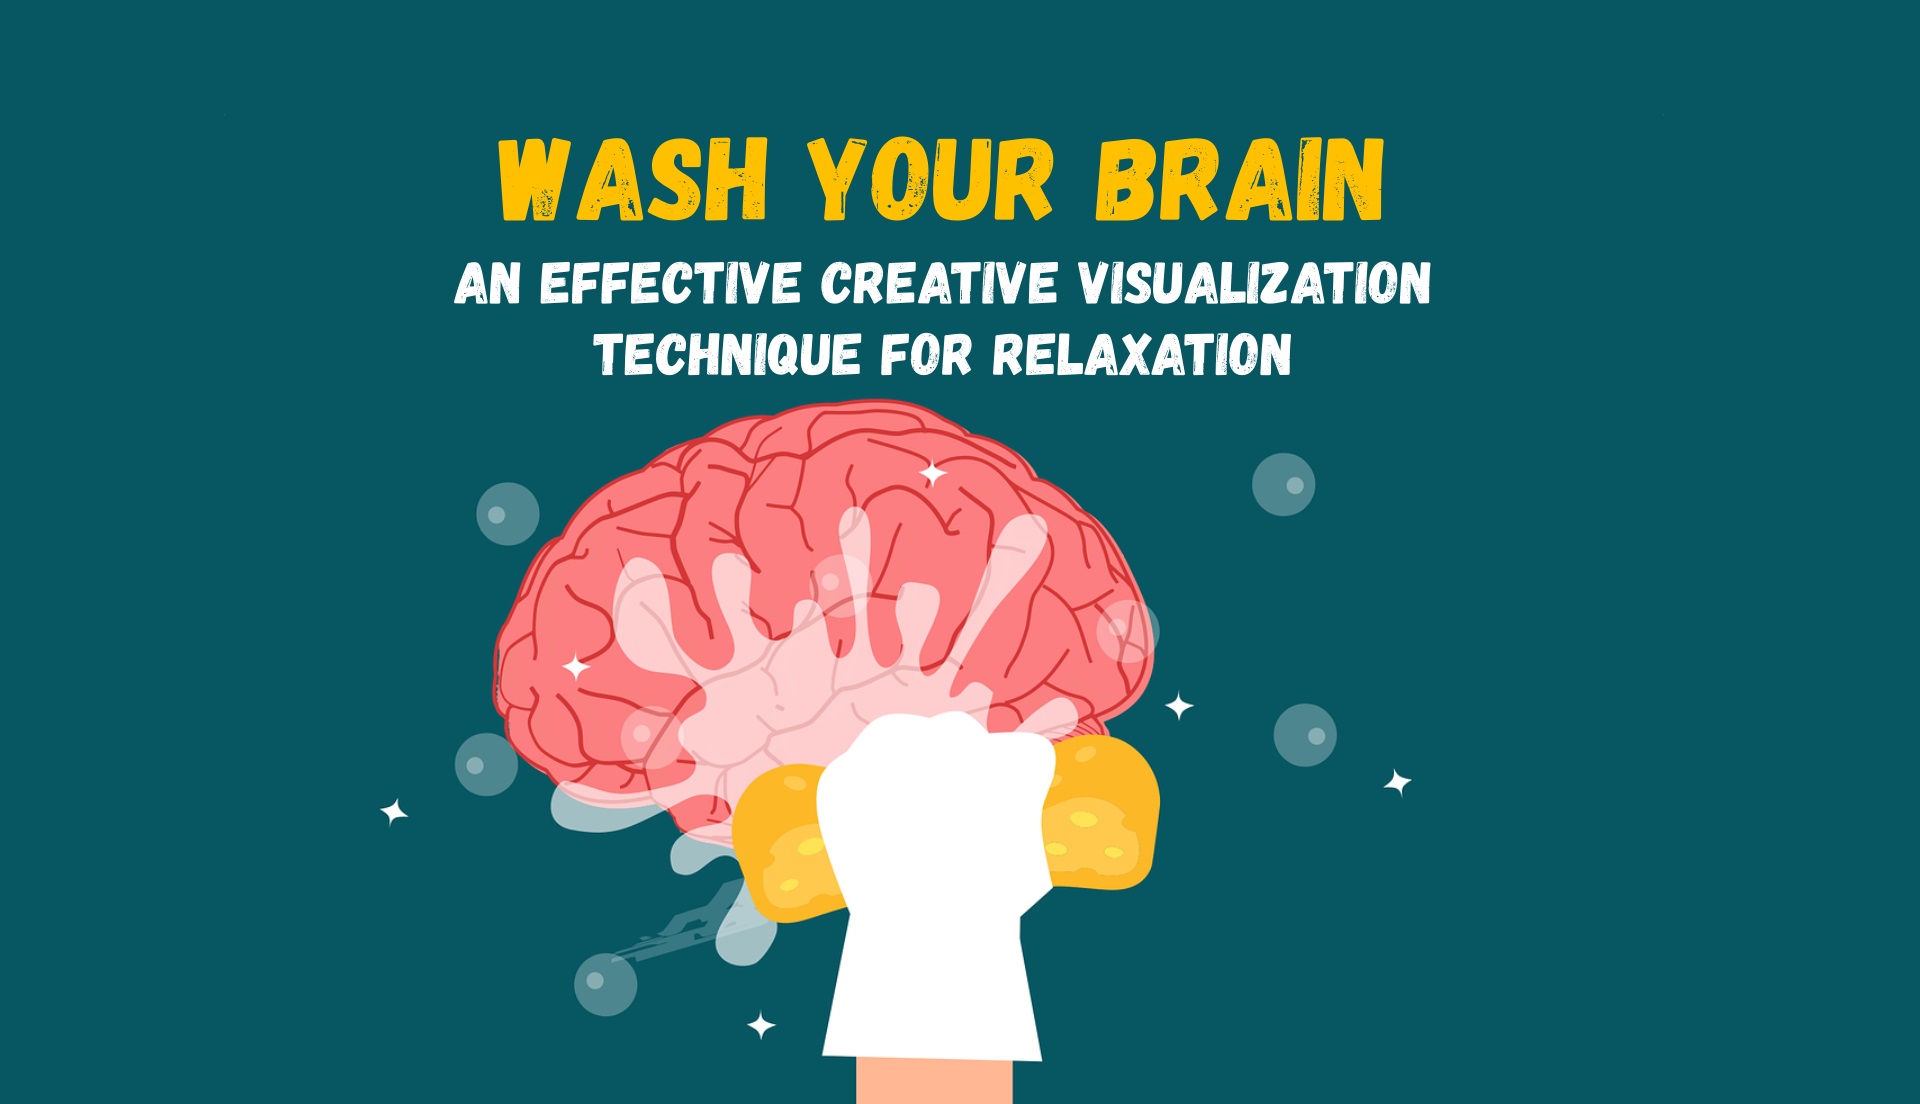 Wash Your Brain - An Effective Creative Visualization Technique For Relaxation